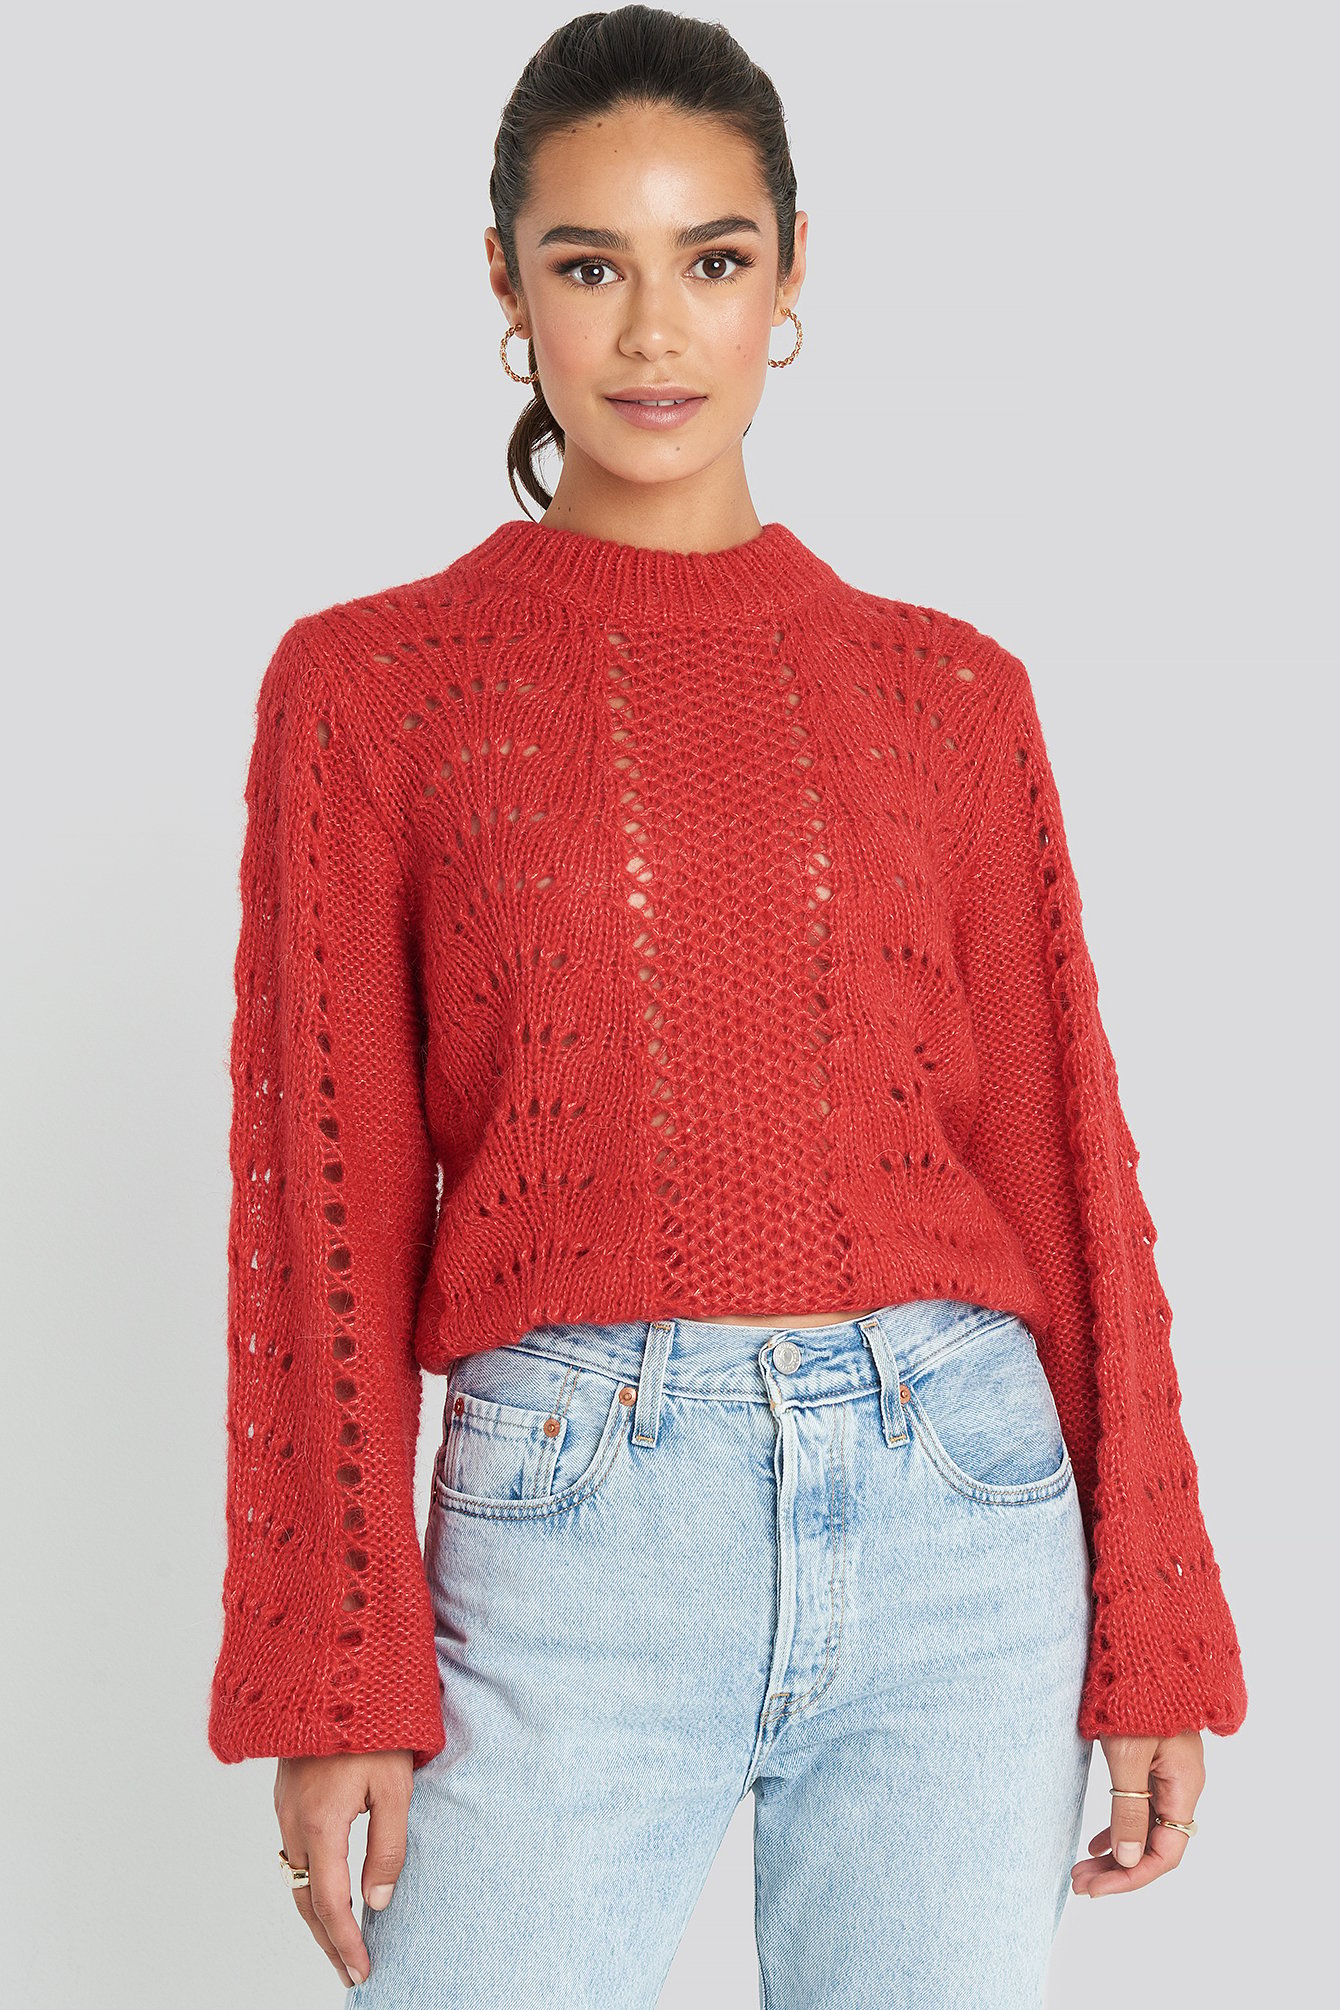 NA-KD Pattern Knitted Round Neck Sweater - Red